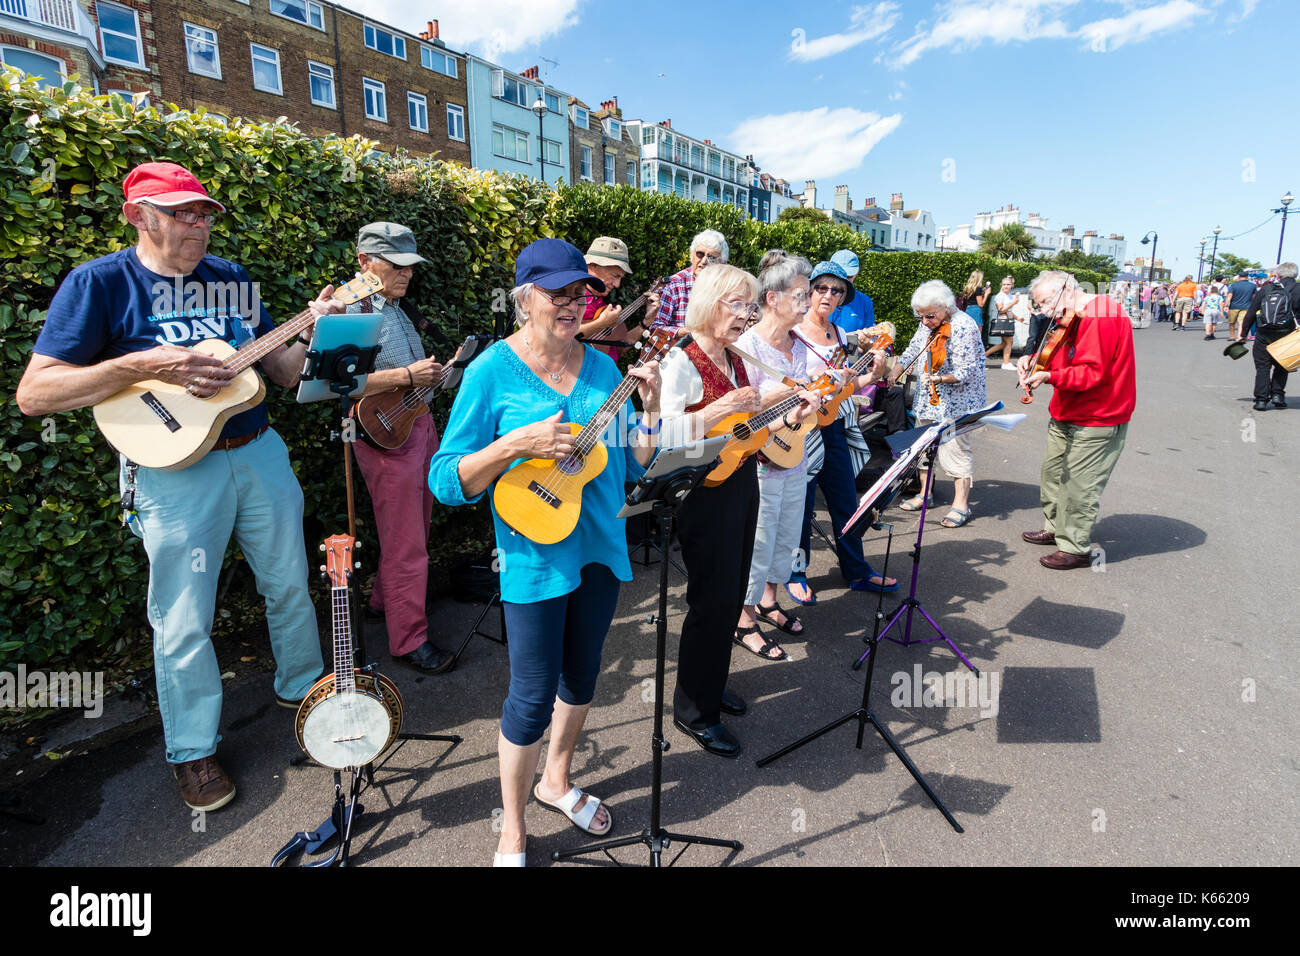 England, Broadstairs folk week. Members of the U3A, a group for elderly people, giving a ukulele concert on the seafront promenade in the summertime. Stock Photo